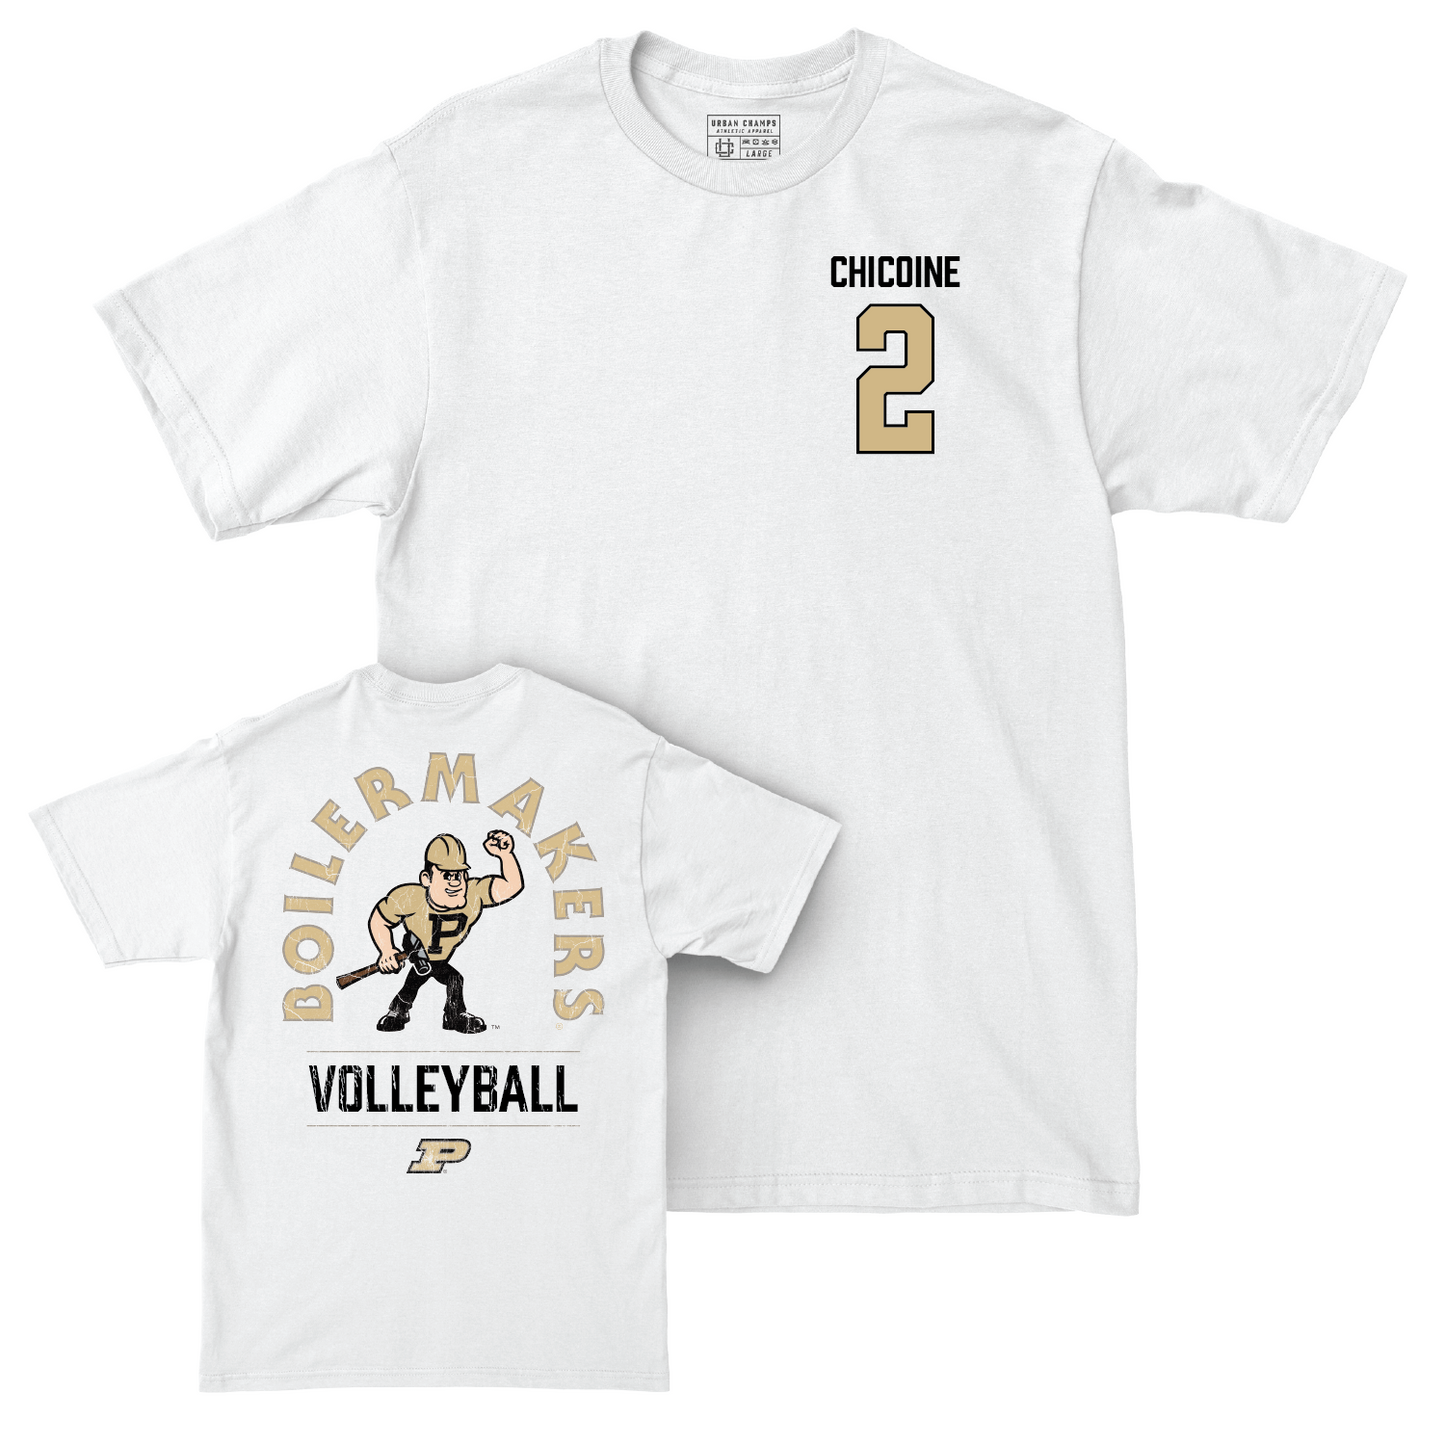 Women's Volleyball White Mascot Comfort Colors Tee - Chloe Chicoine | #2 Youth Small